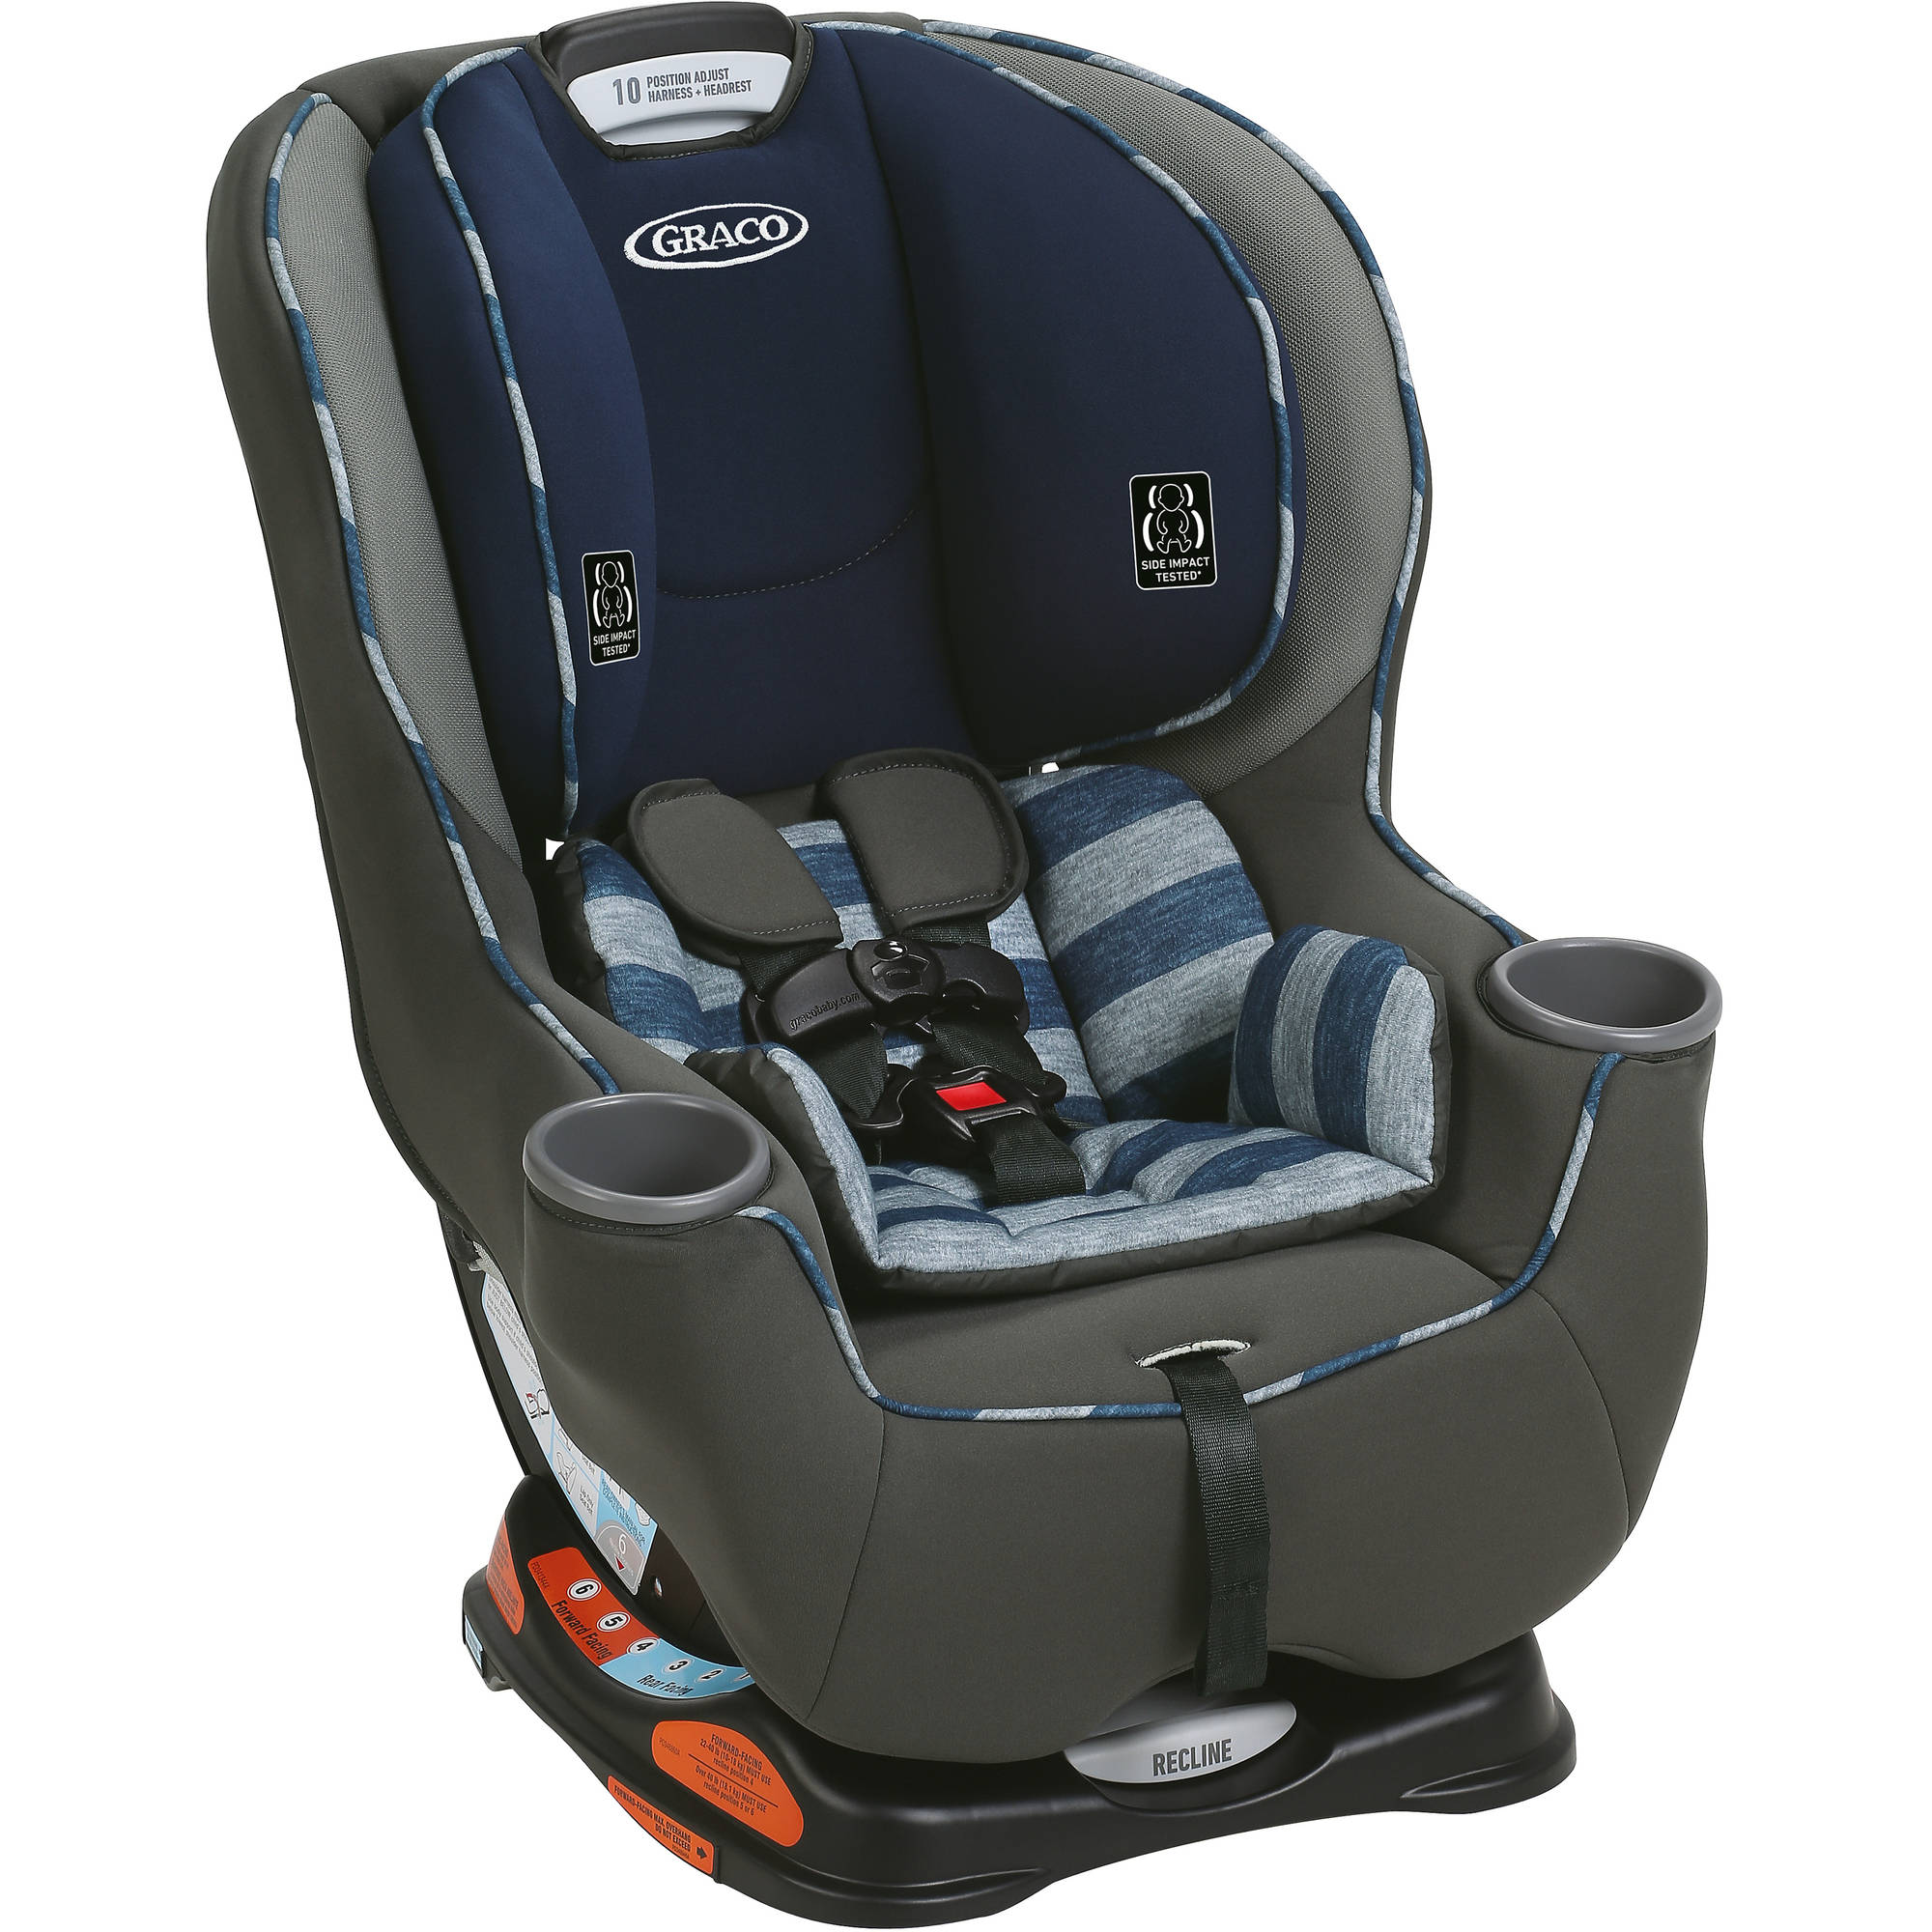 Graco Sequel 65 Convertible Car Seat with 6-Position Recline, Caden Navy - image 2 of 7